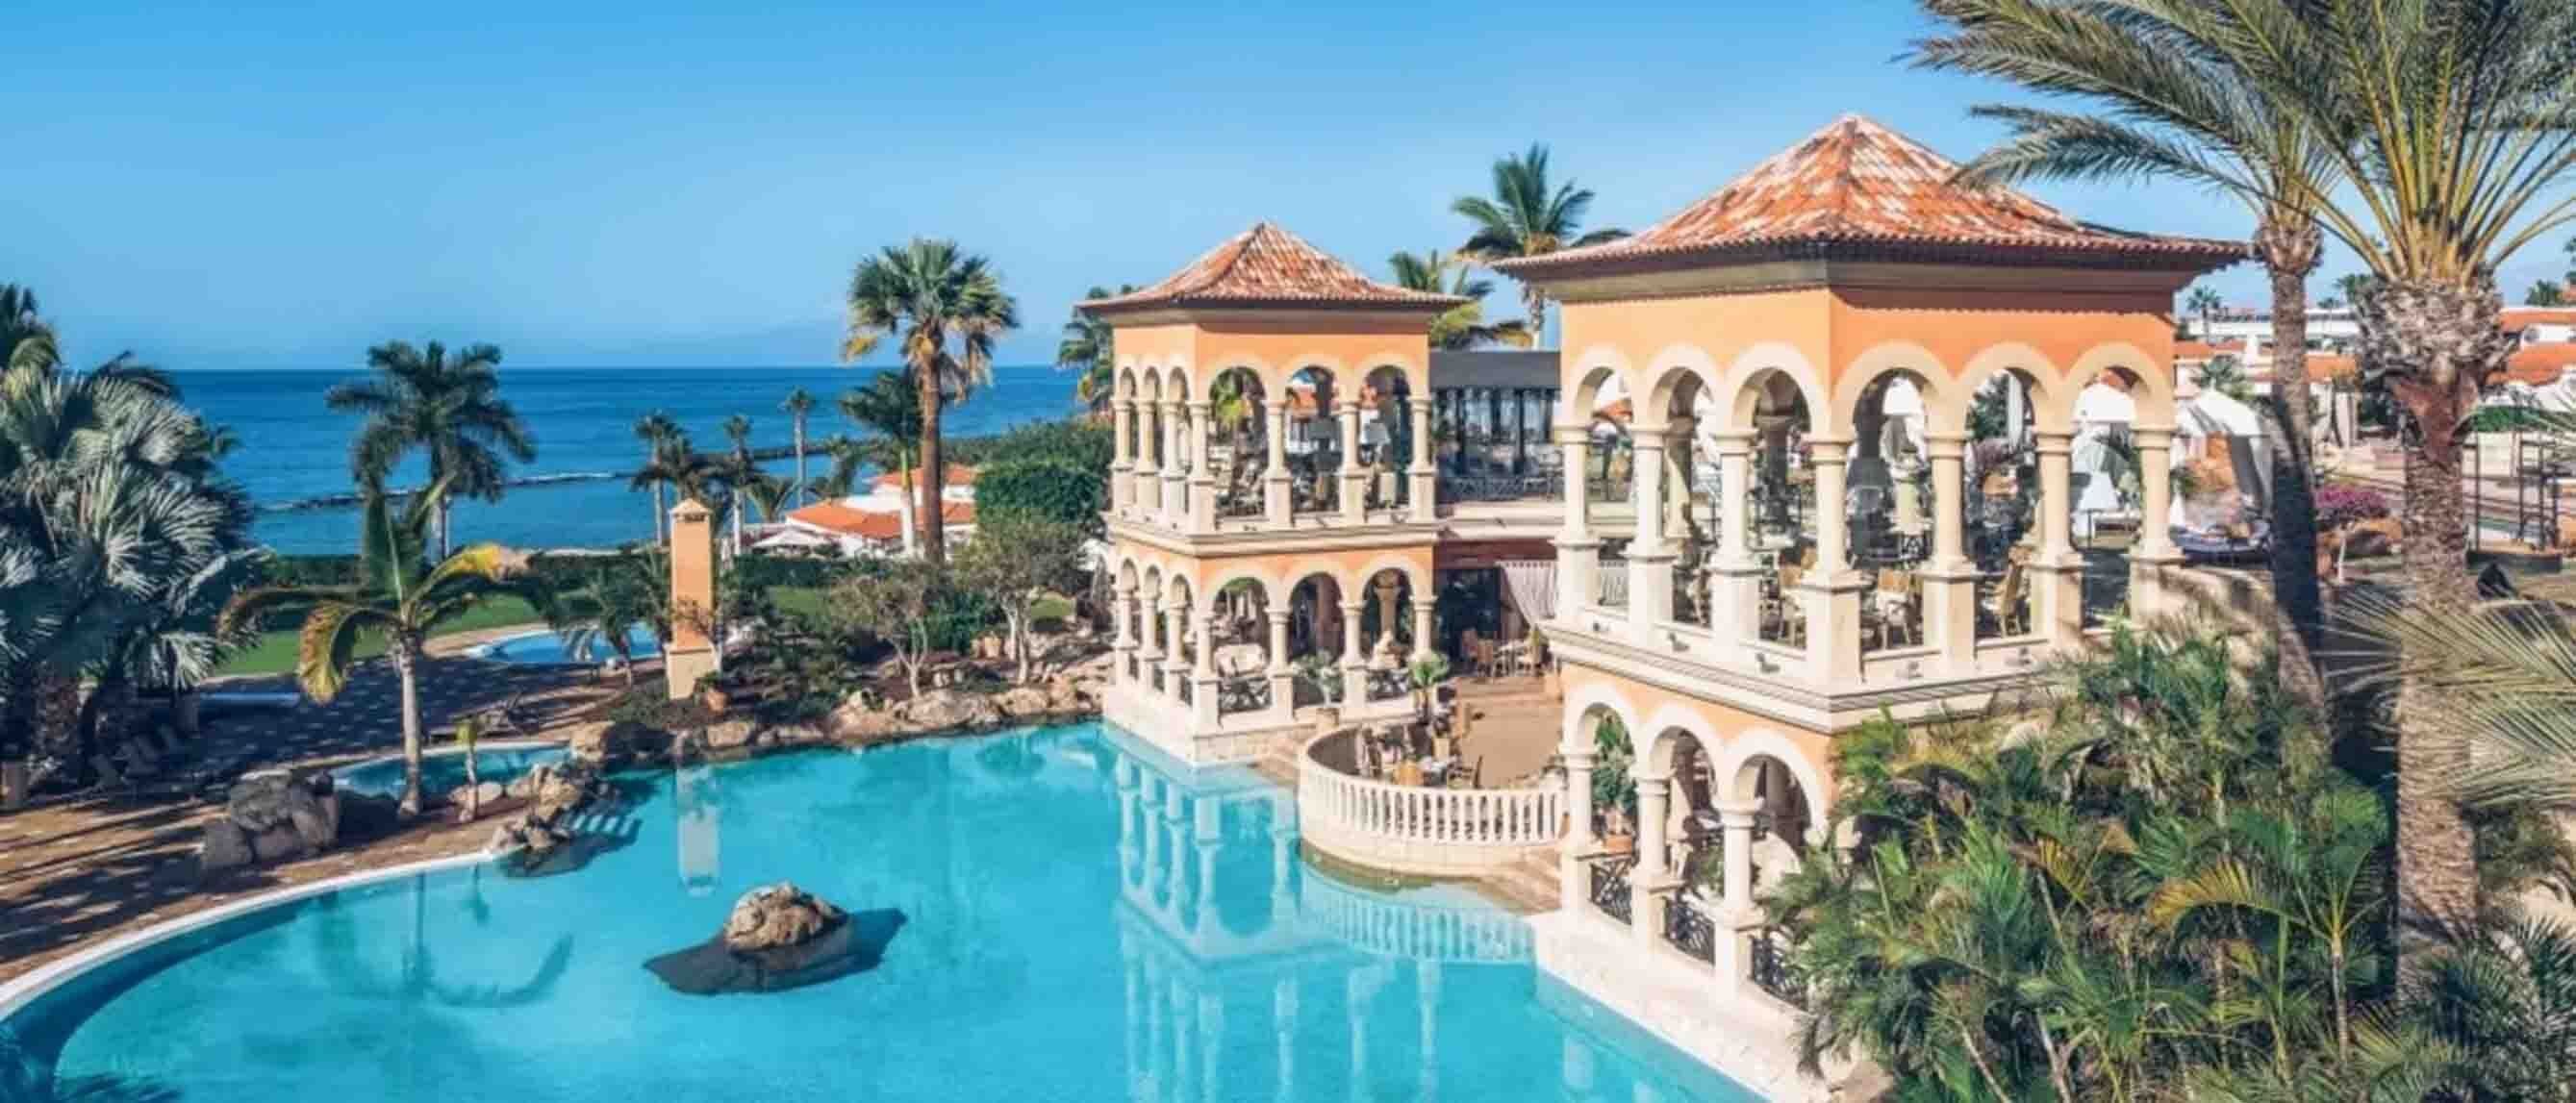 Which Tenerife hotels are the best for UK travellers?